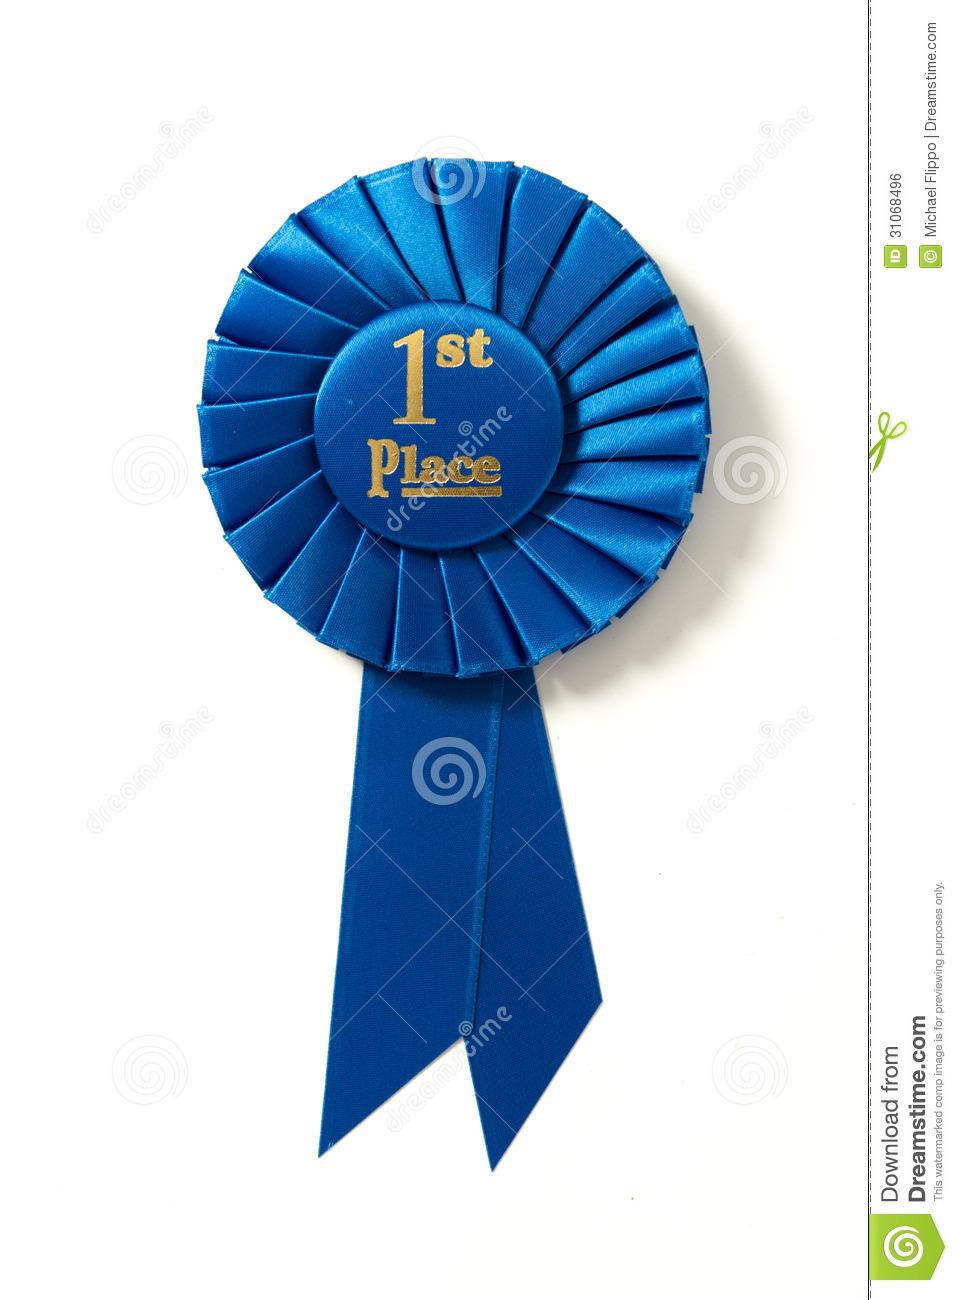 First Place Blue Ribbon On White Royalty Free Stock Image   Image    